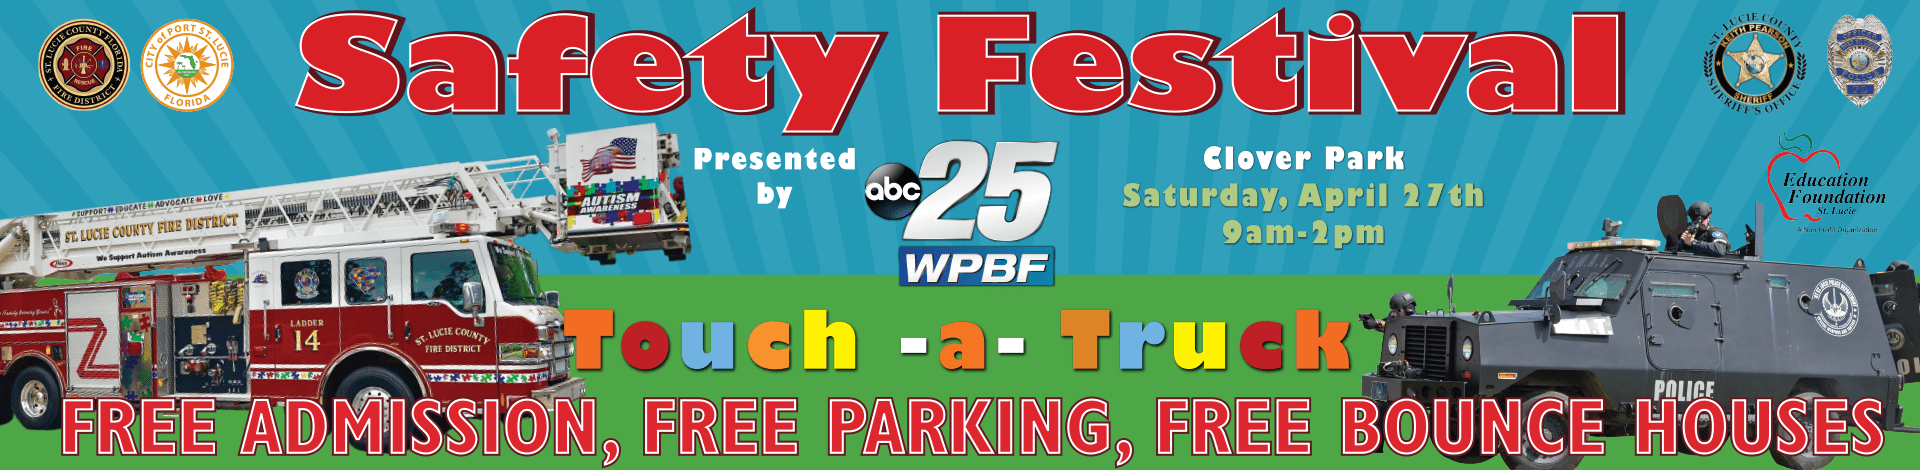 St. Lucie County Safety Festival April 27th